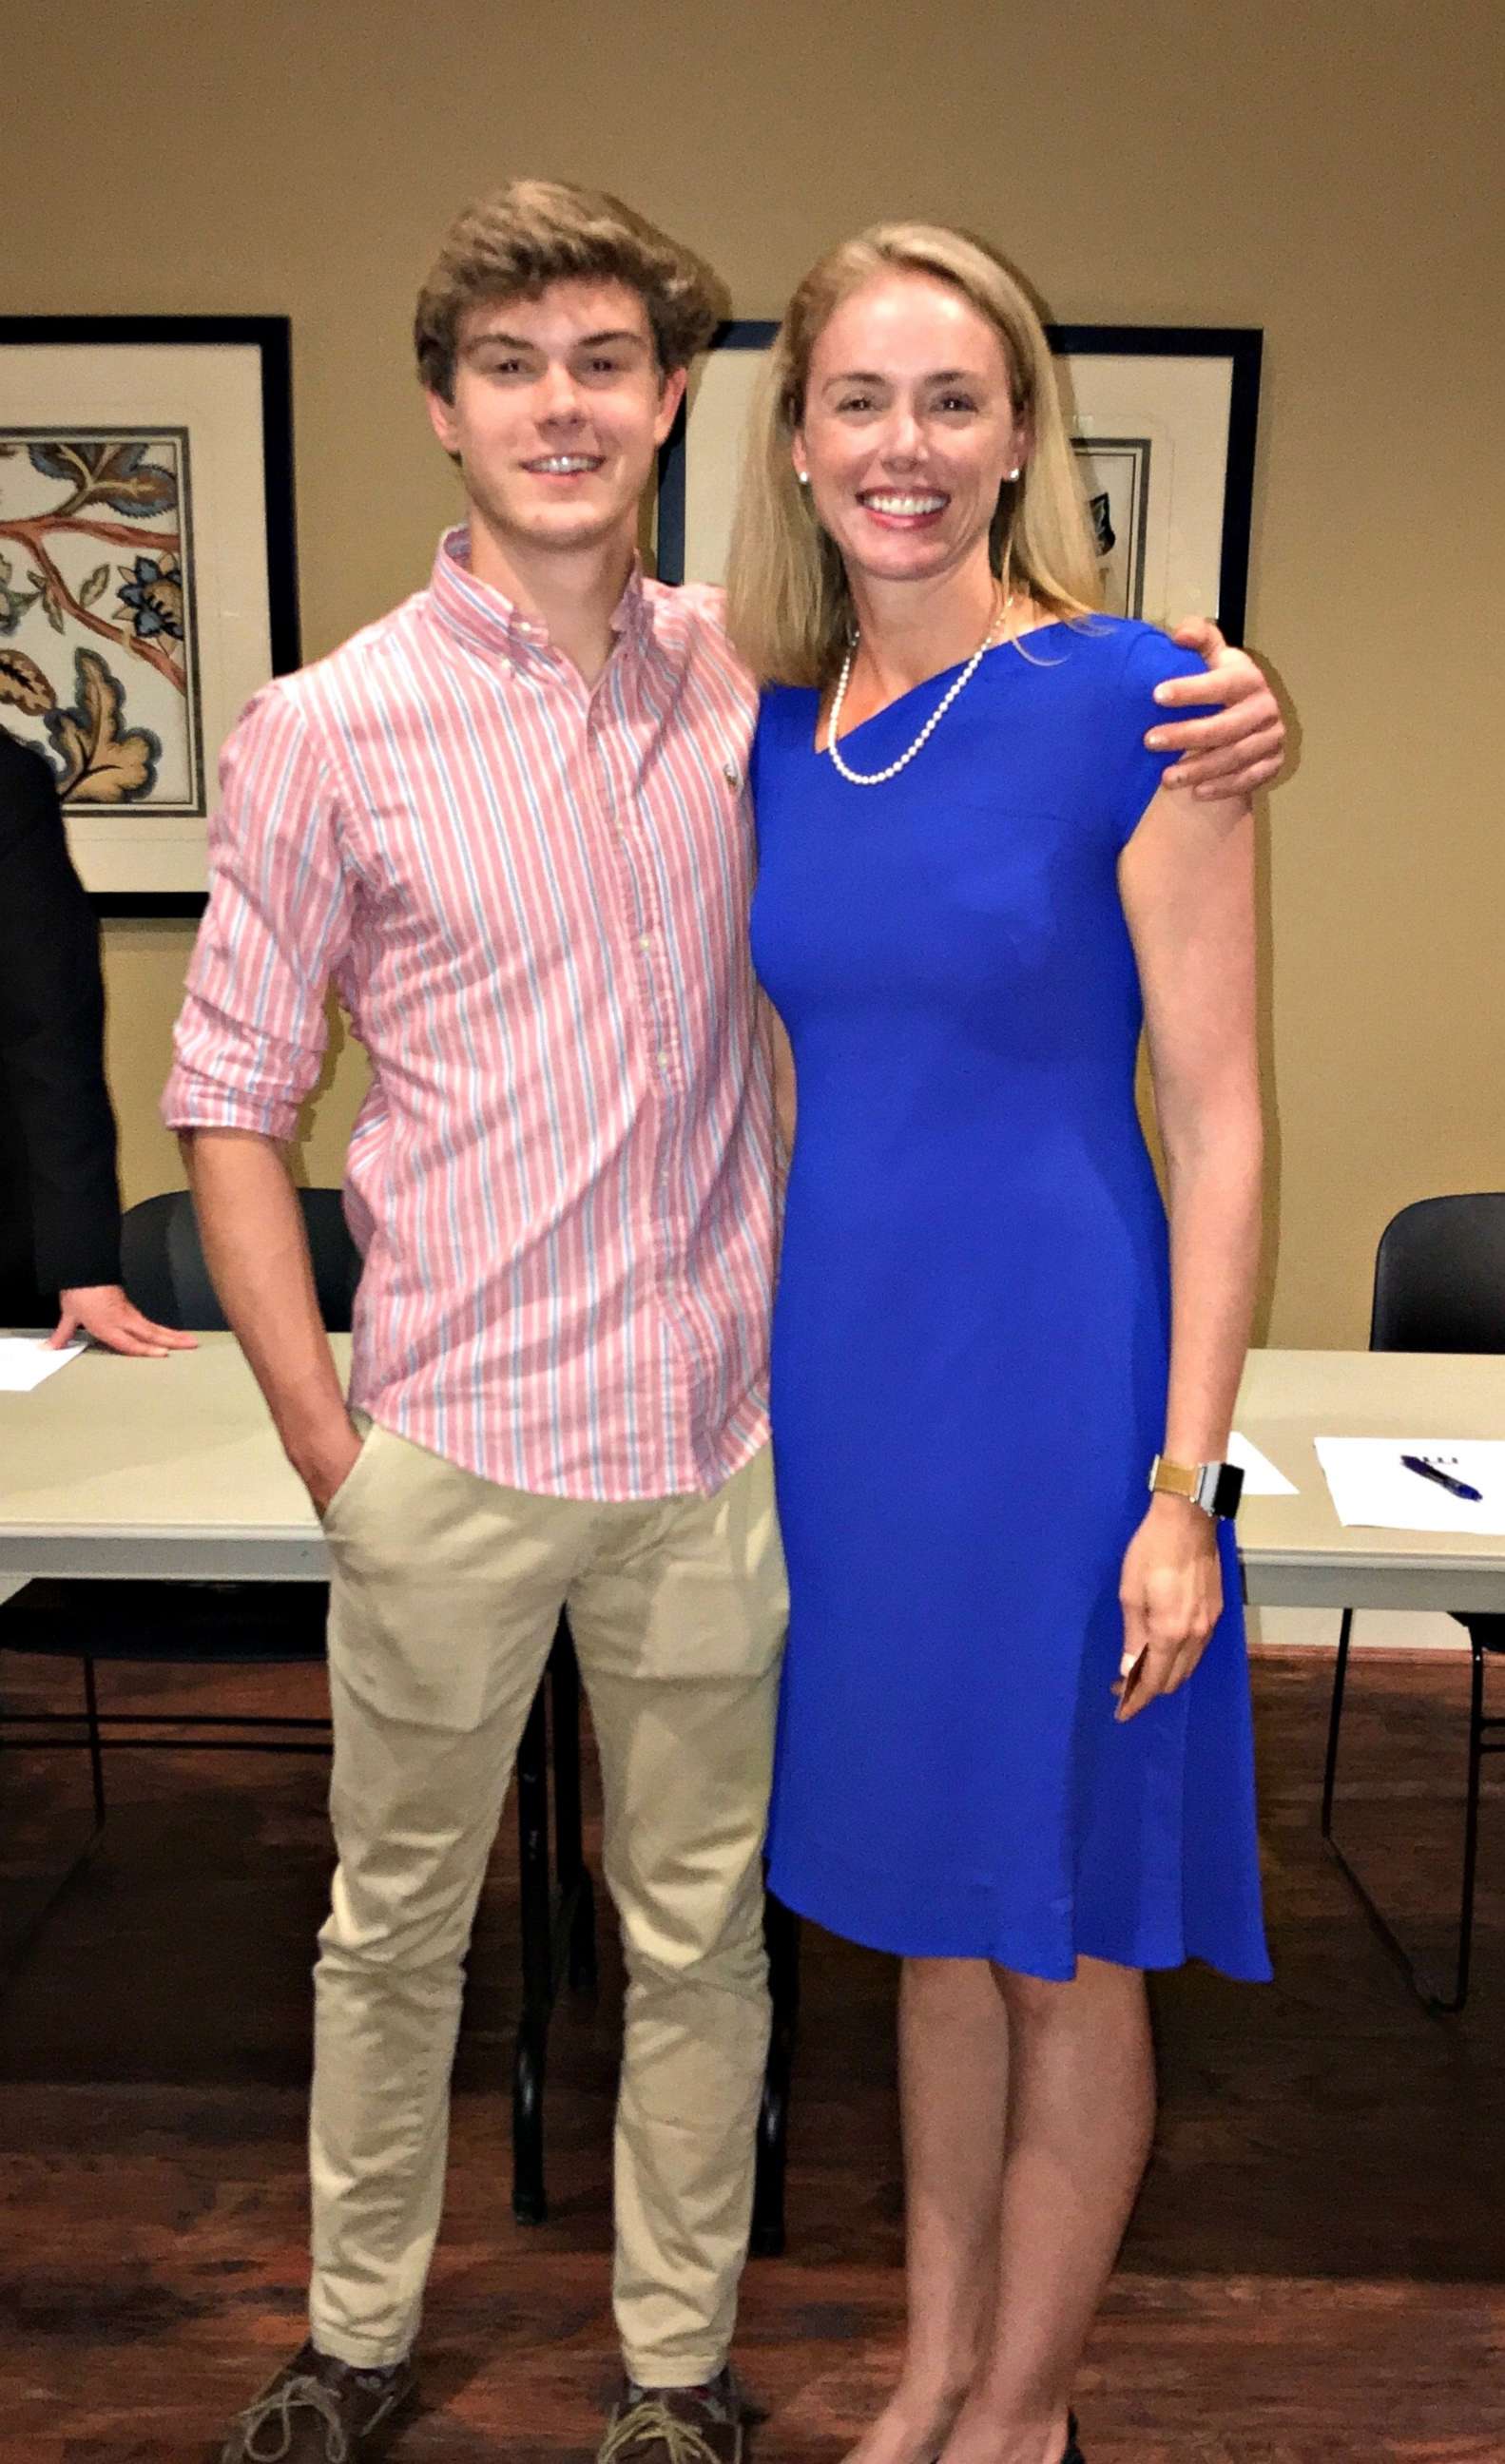 PHOTO: Alli Summerford poses with her 17-year-old son, Gram.